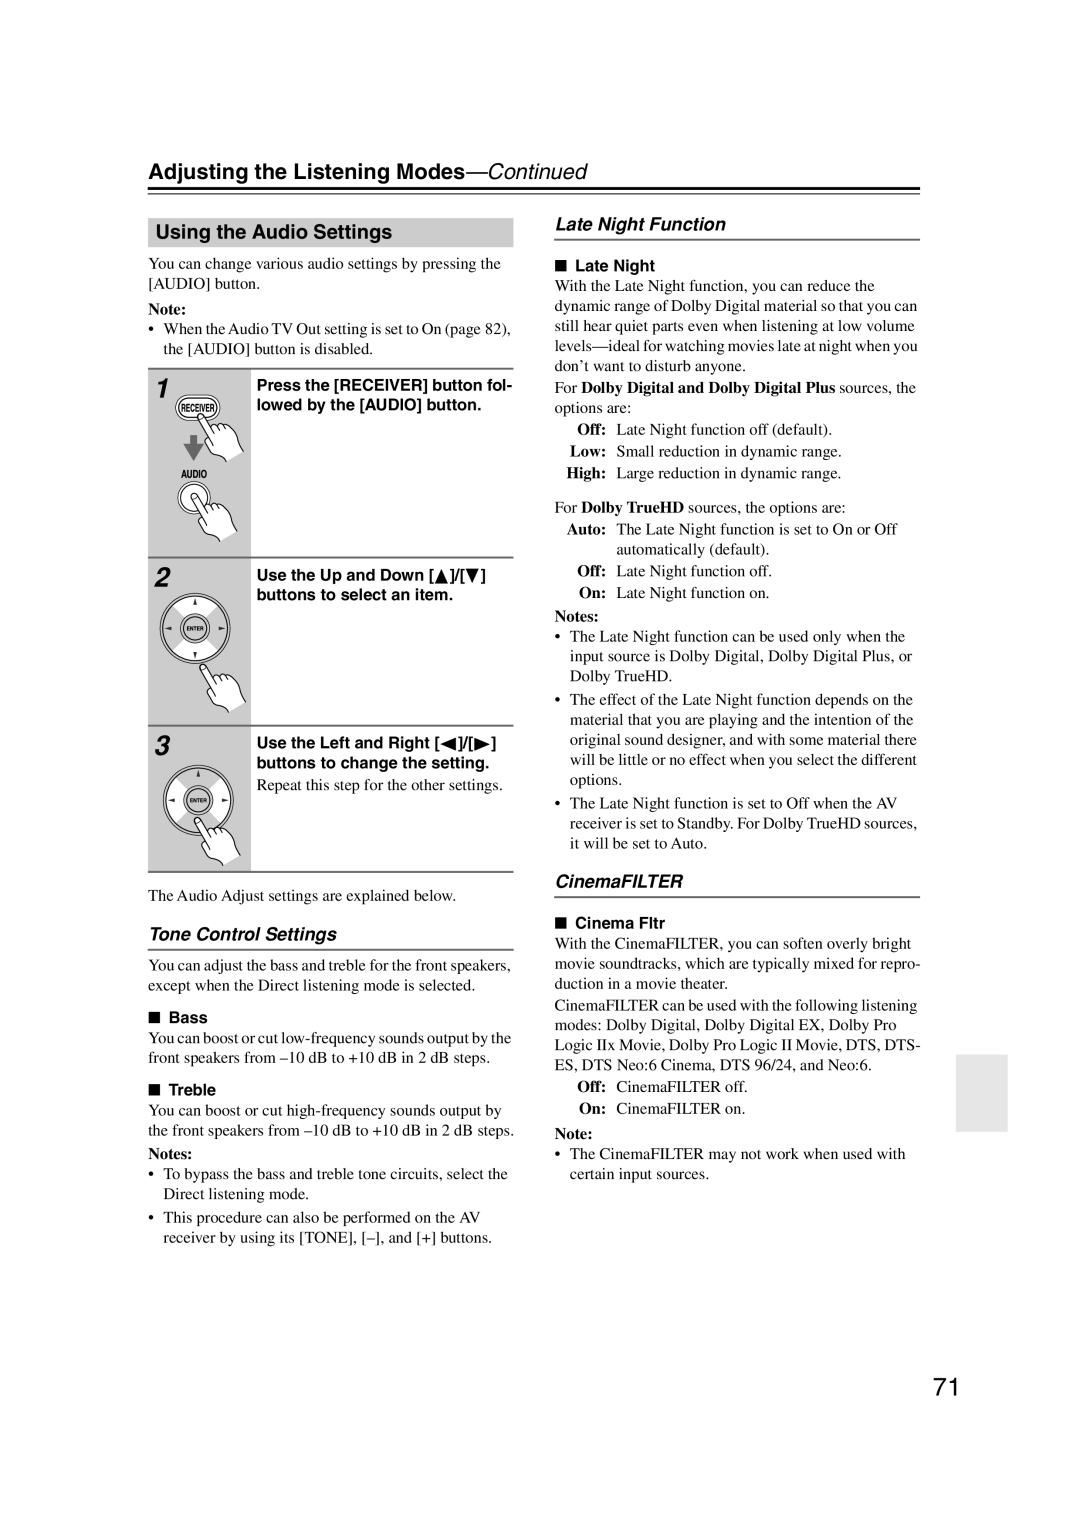 Onkyo HT-S6100 instruction manual Using the Audio Settings, Tone Control Settings, Late Night Function, CinemaFILTER 